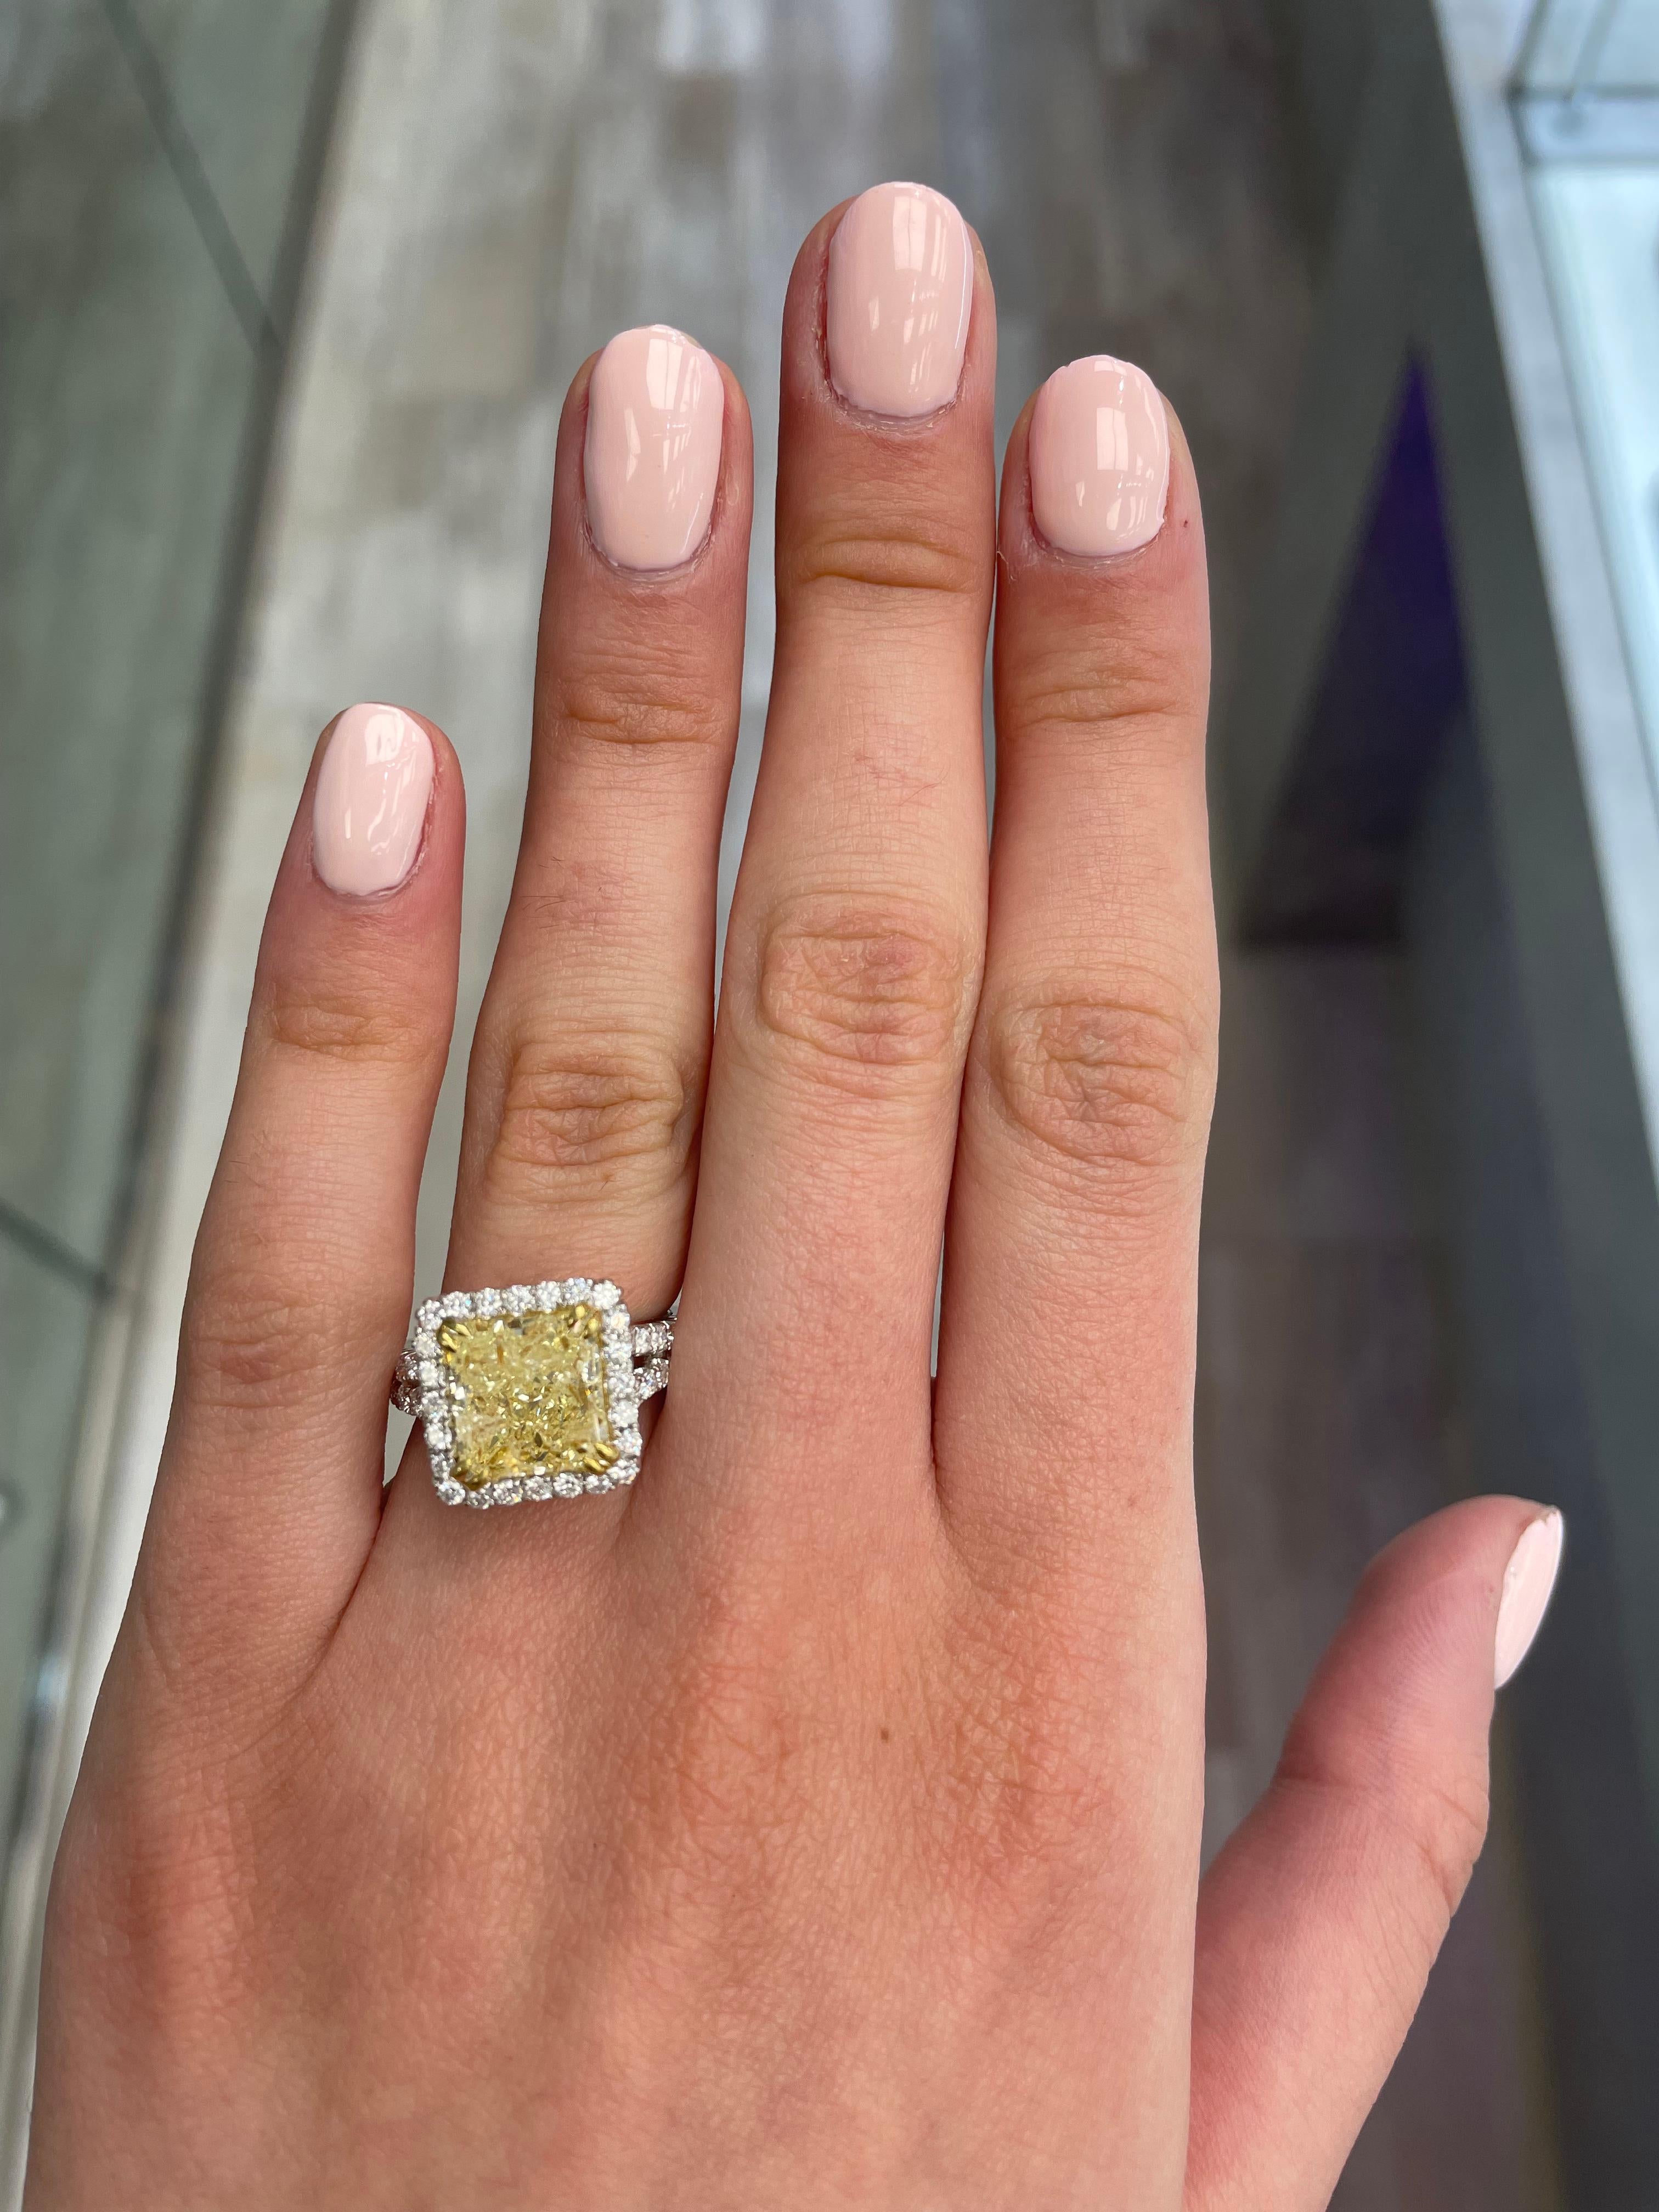 Stunning modern EGL certified yellow diamond with halo ring, two-tone 18k yellow and white gold. By Alexander Beverly Hills
5.43 carats total diamond weight.
4.50 carat radiant cut Fancy Intense Yellow color and I1 clarity diamond, EGL graded.